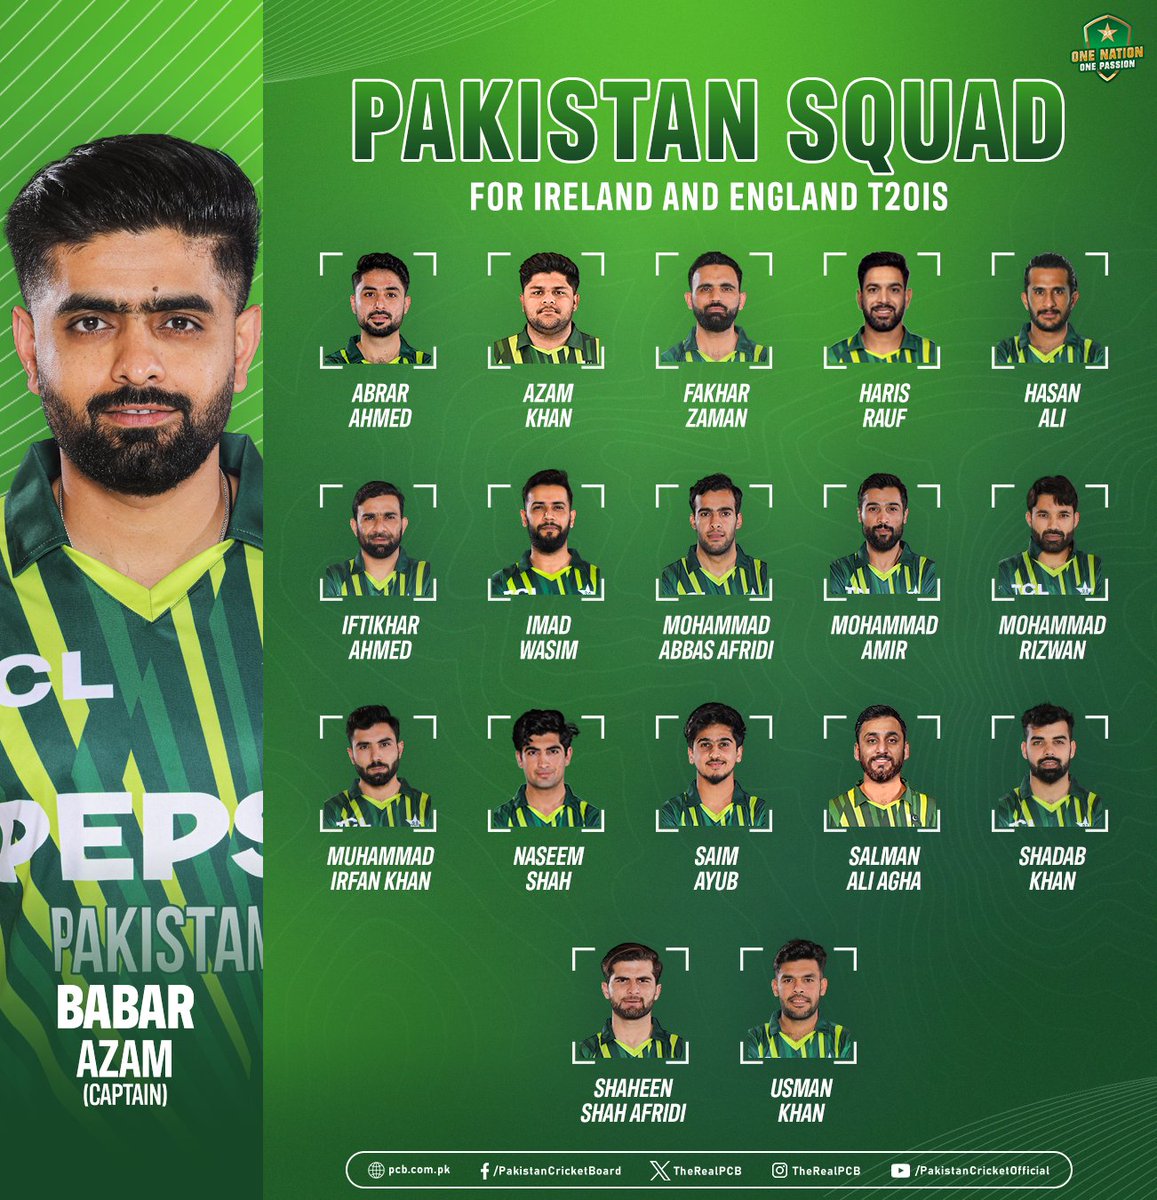 𝗕𝗮𝗯𝗮𝗿 𝗔𝘇𝗮𝗺 (𝗖𝗮𝗽𝘁𝗮𝗶𝗻) ⭐ #Mission24 begins with an 18-member squad rearing to go against Ireland and England. Rate it on a scale of 1-10. #BabarAzam | #BabarAzam𓃵